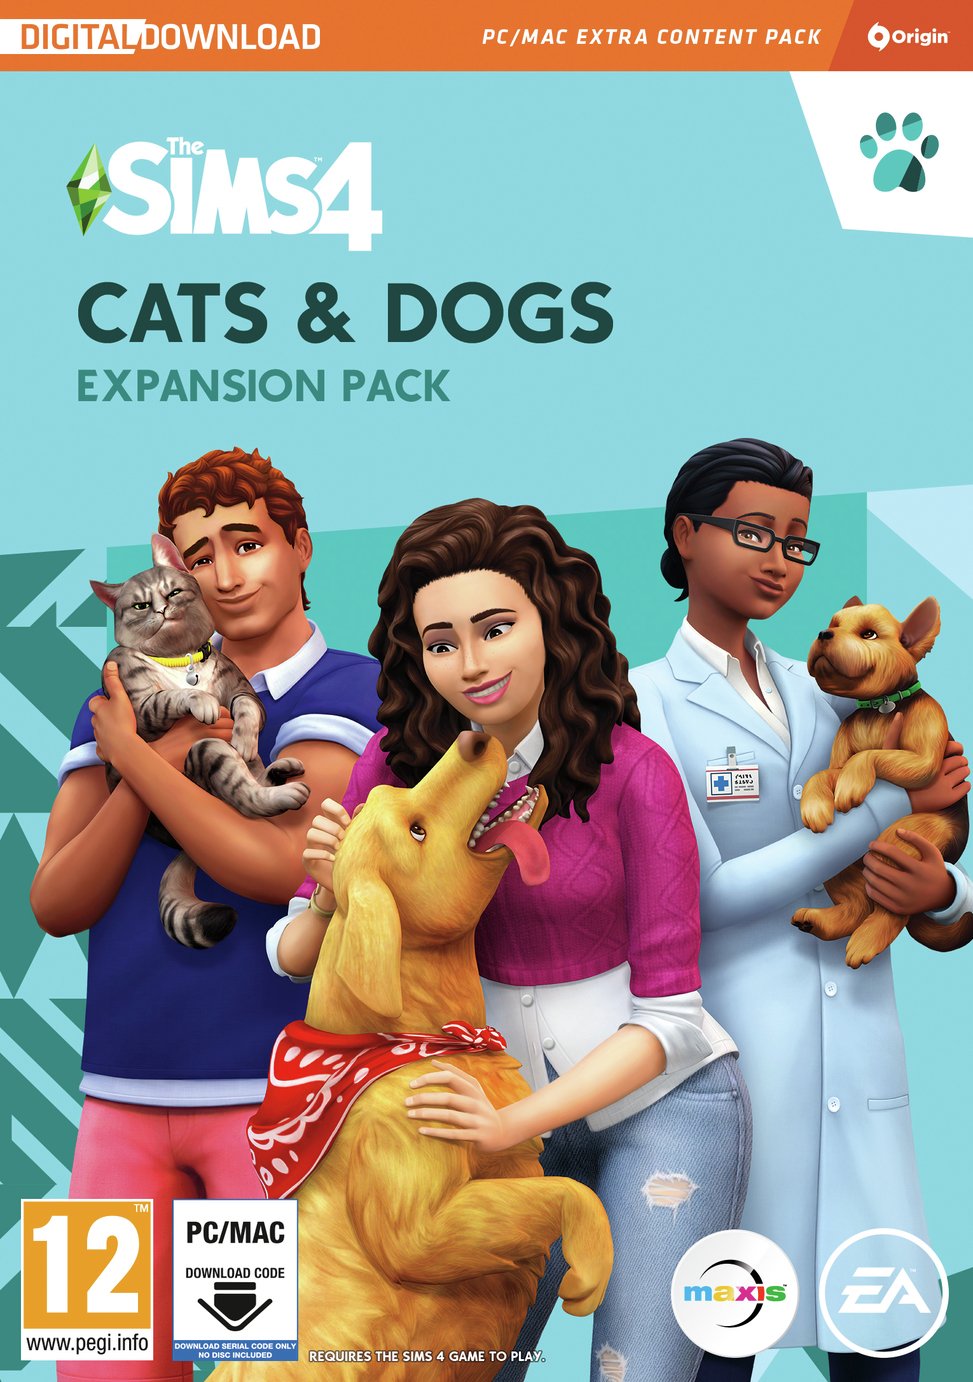 The Sims 4 Cats & Dogs PC Game